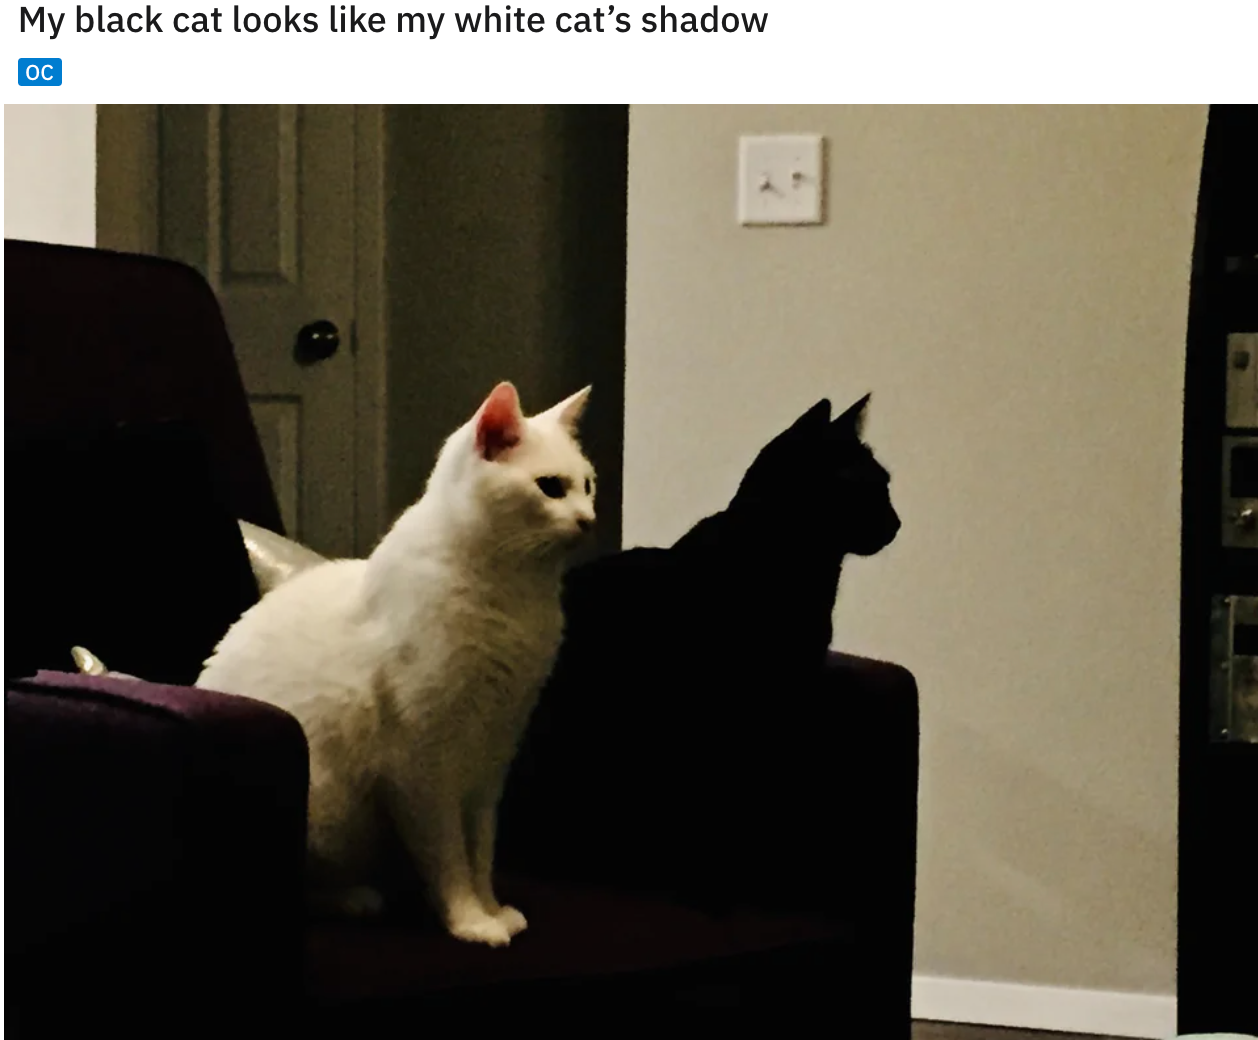 cool and funny pics - My black cat looks my white cat's shadow